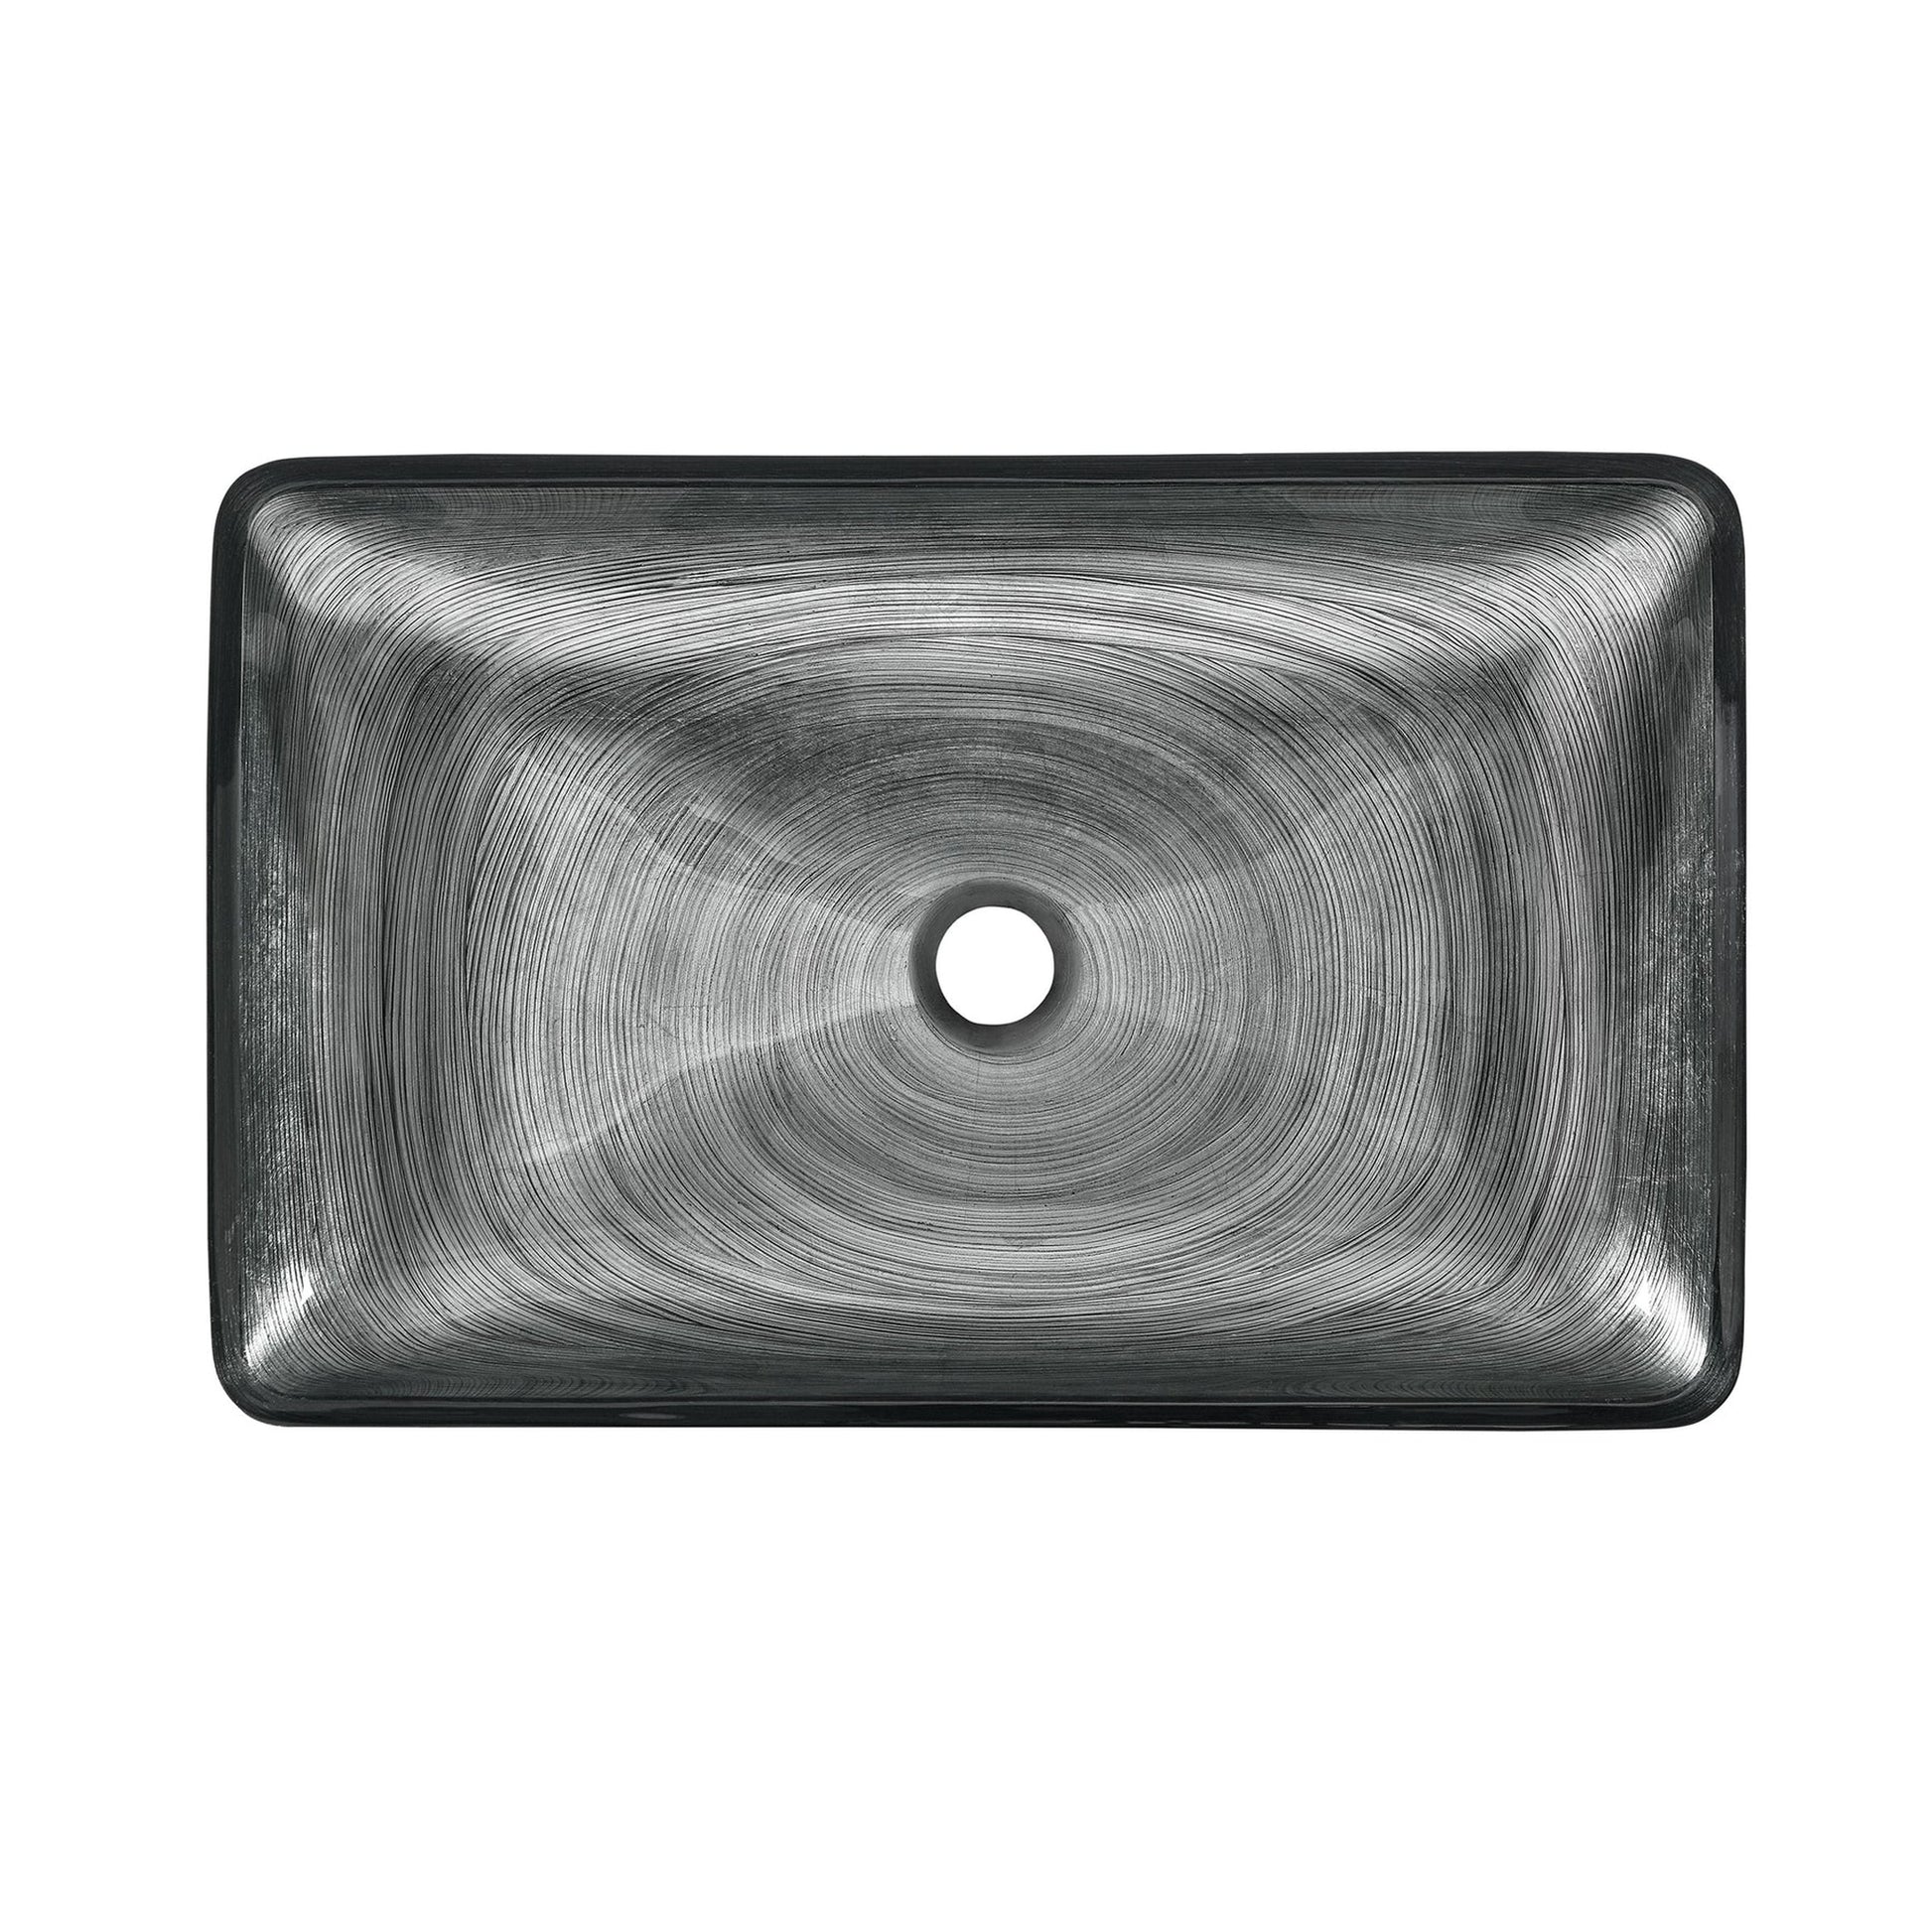 Swiss Madison Cascade 22" x 14" Smoky Gray Rectangular Tempered Glass Bathroom Vessel Sink With Waterfall Faucet